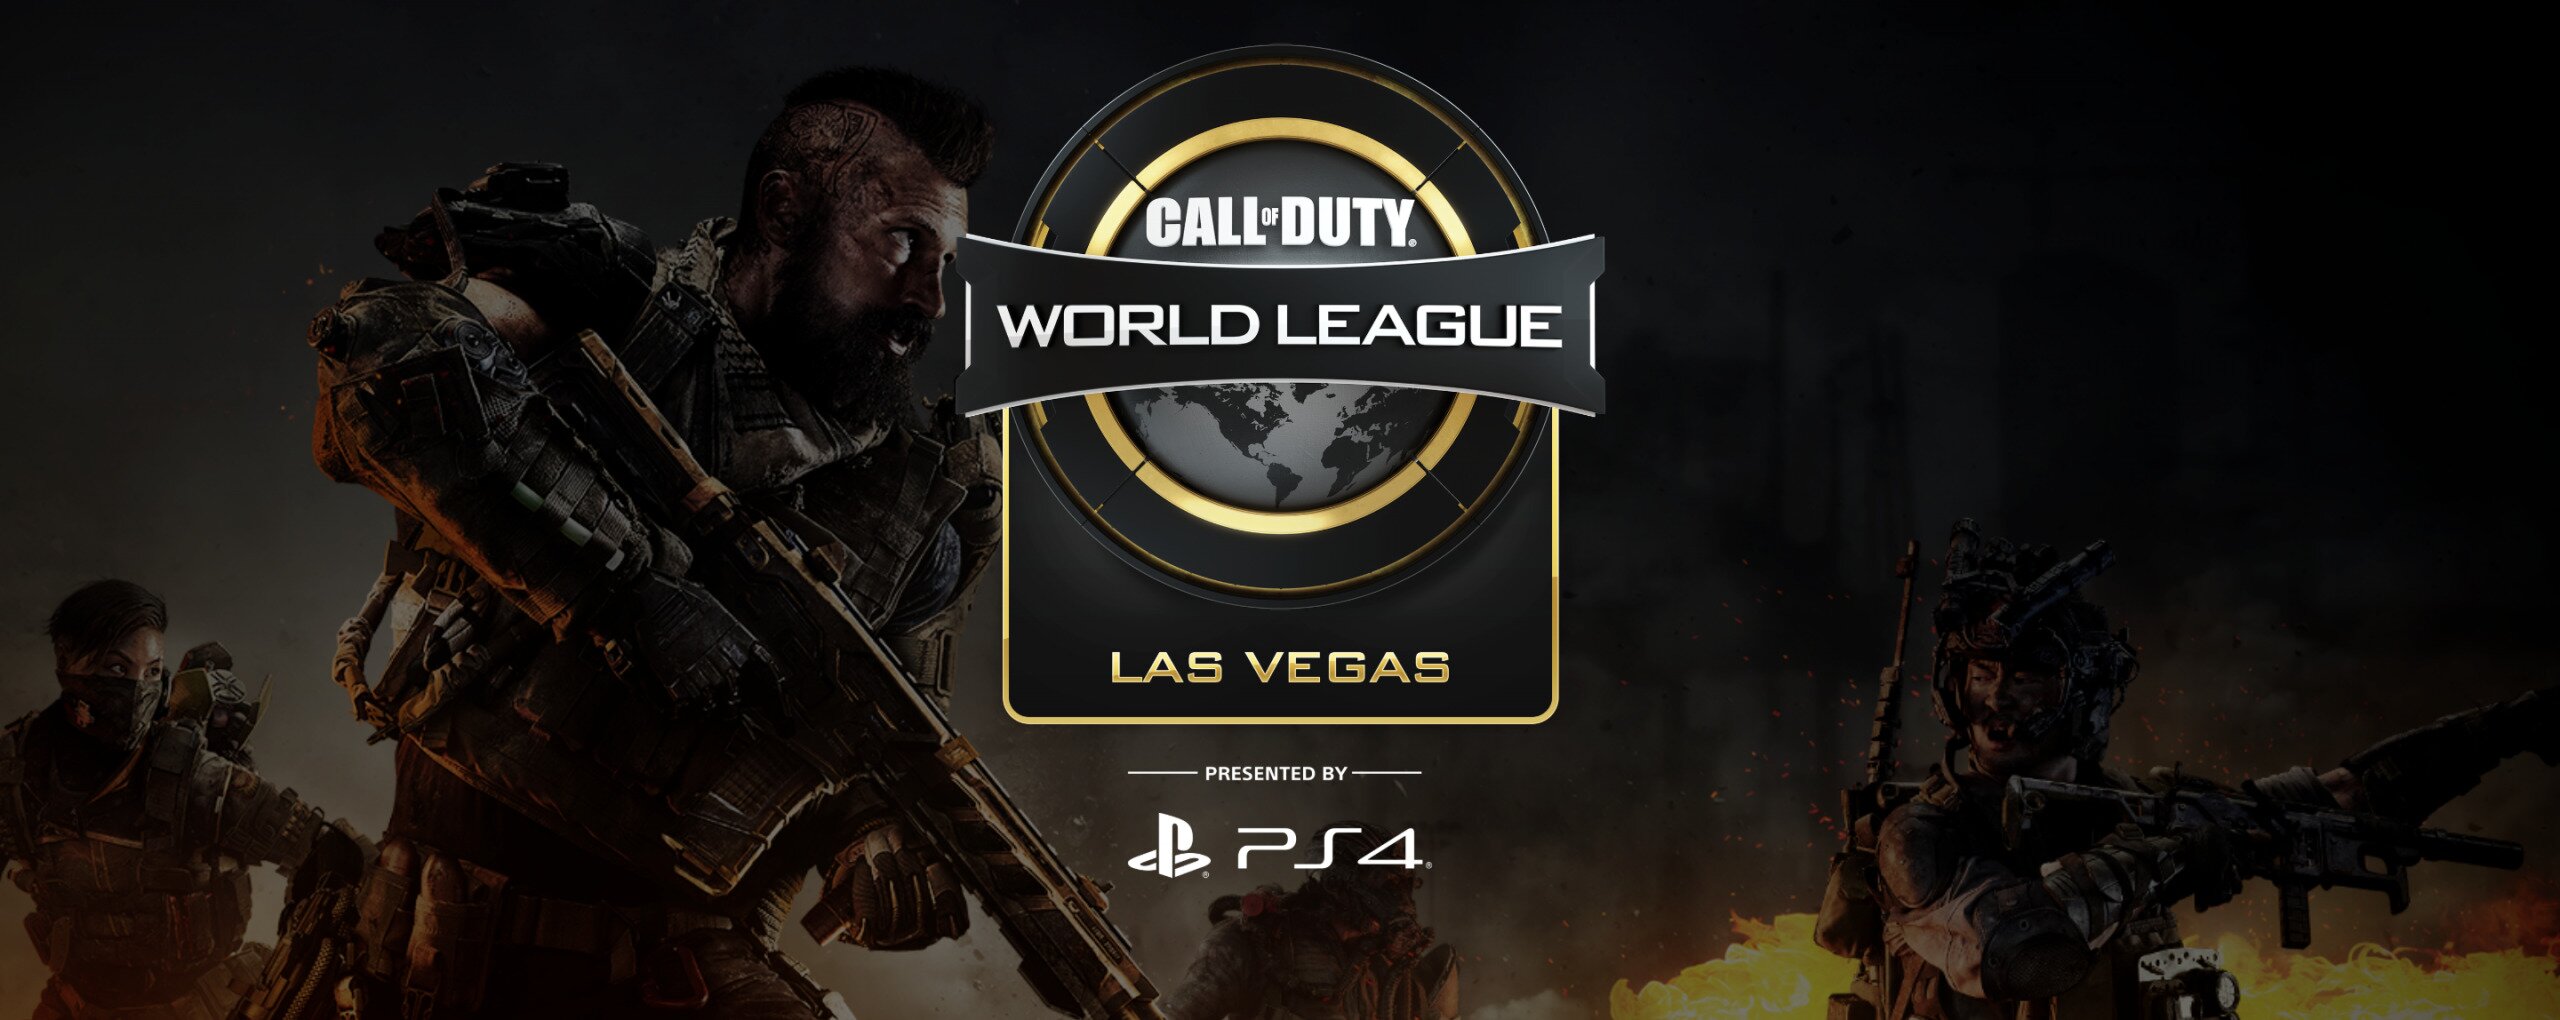 The matches for CWL Las Vegas will kick off at 4pm CST on Friday.